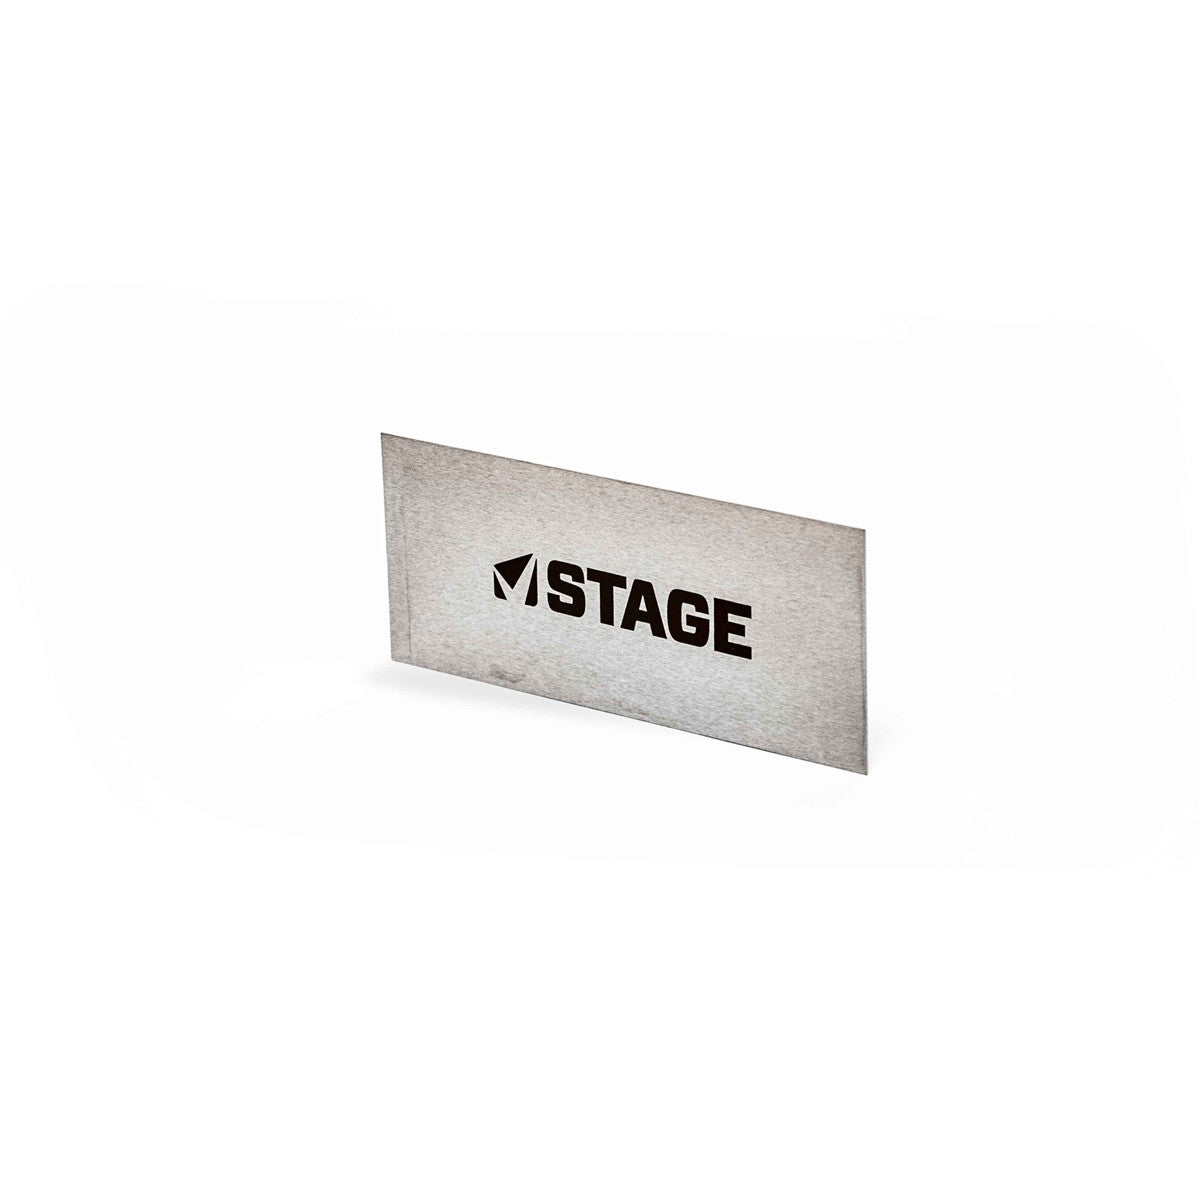 STAGE Steel P-Tex Scraper (SKU: STGT-007) - Used for removing P-Tex and Base Welds from the bases of ski and snowboard tuning and repair.